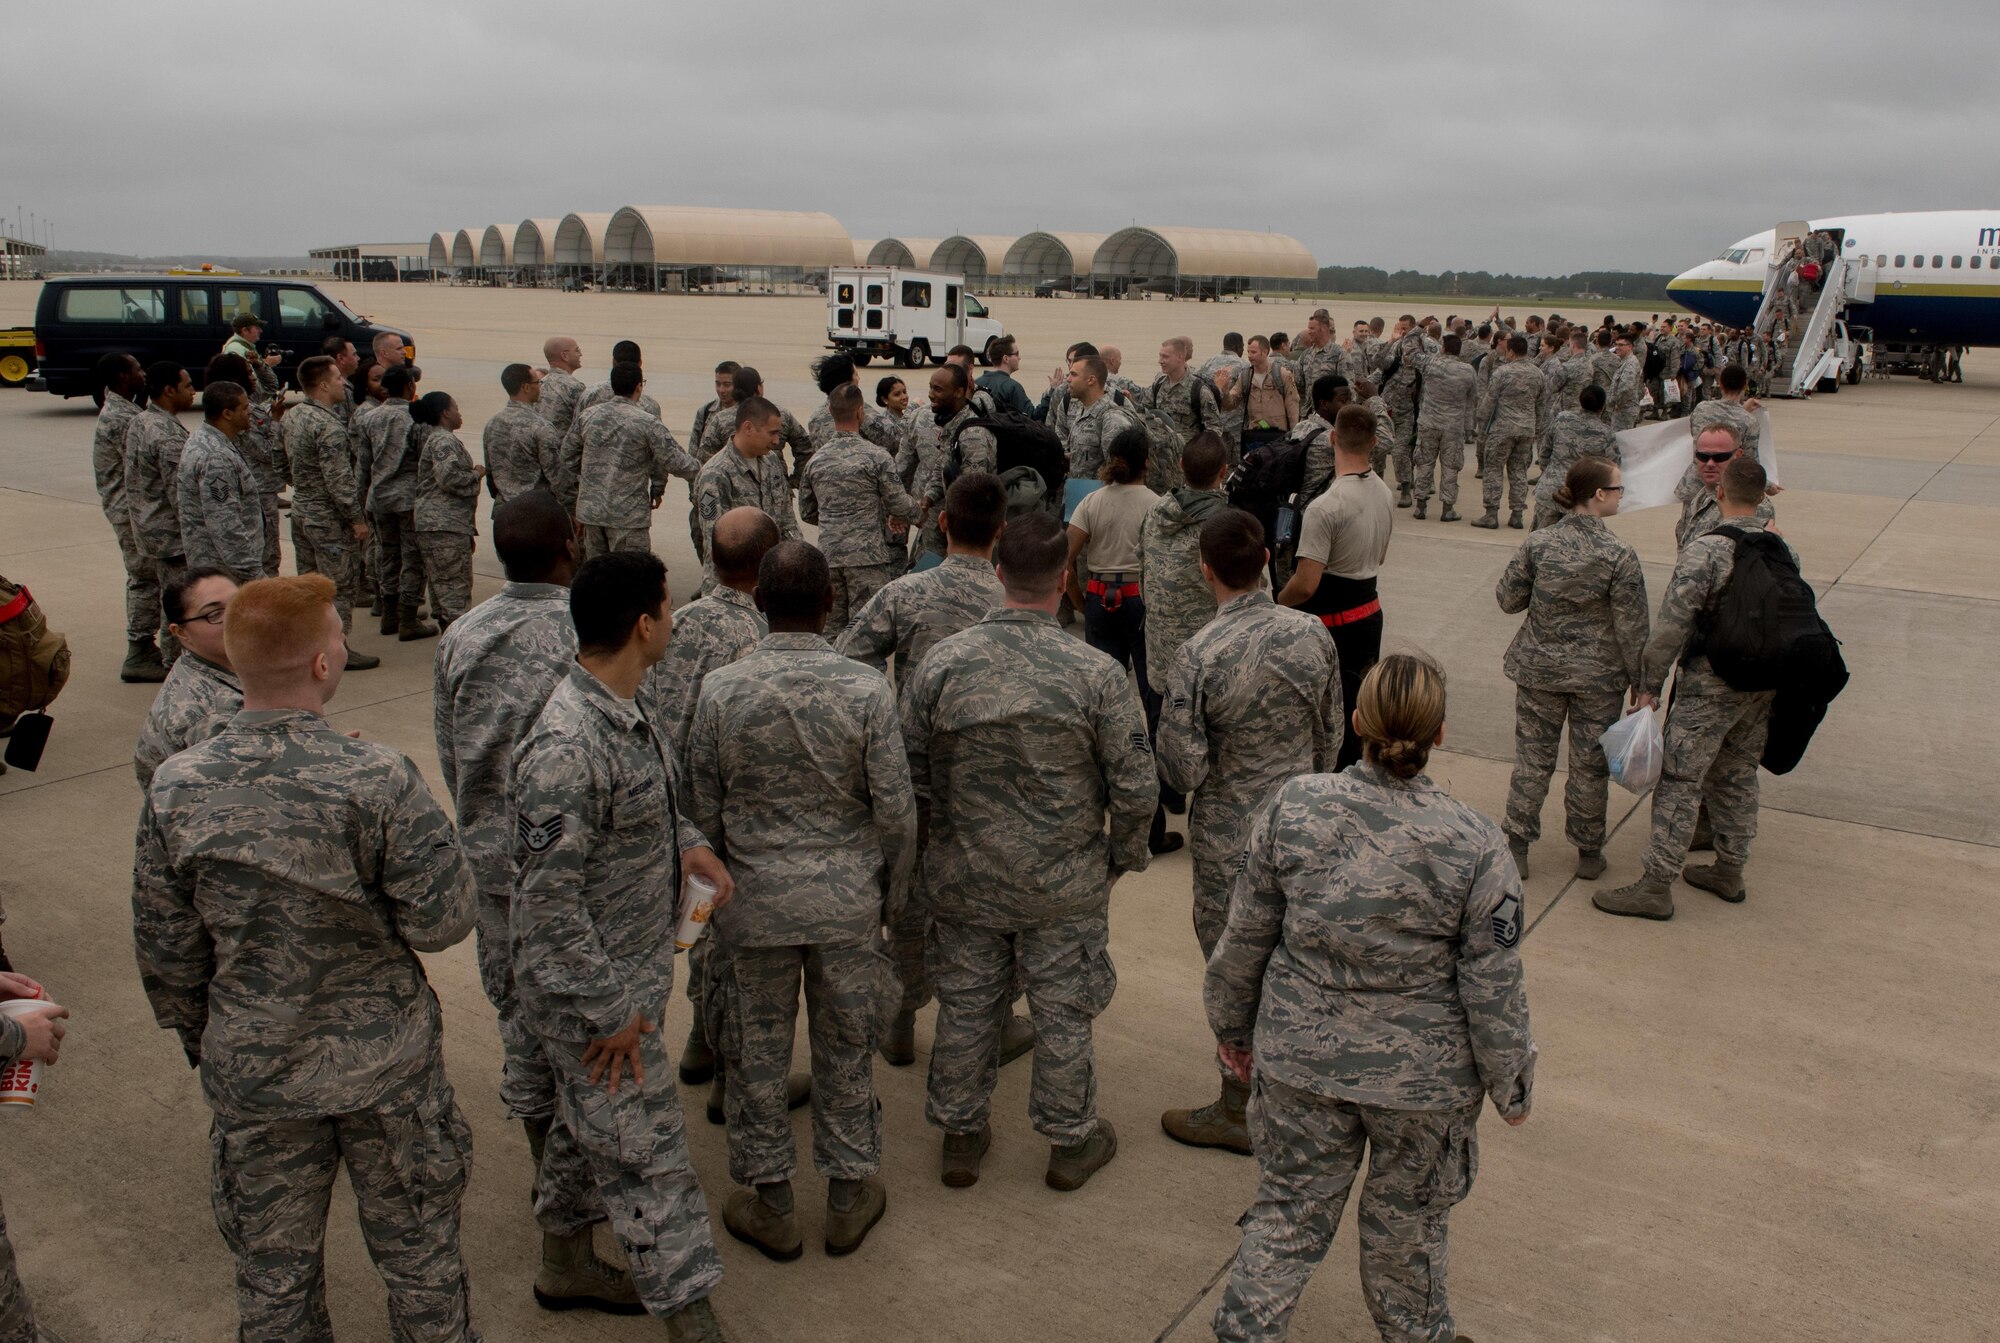 Airmen assigned to the 1st Fighter Wing return home after a 6-month deployment to the Middle East, Oct. 12, 2017. The deployment consisted of F-22 Raptors and Airmen representing the 1st FW in Operation Inherent Resolve against ISIS. (U.S. Air Force photo by Staff Sgt. Carlin Leslie)